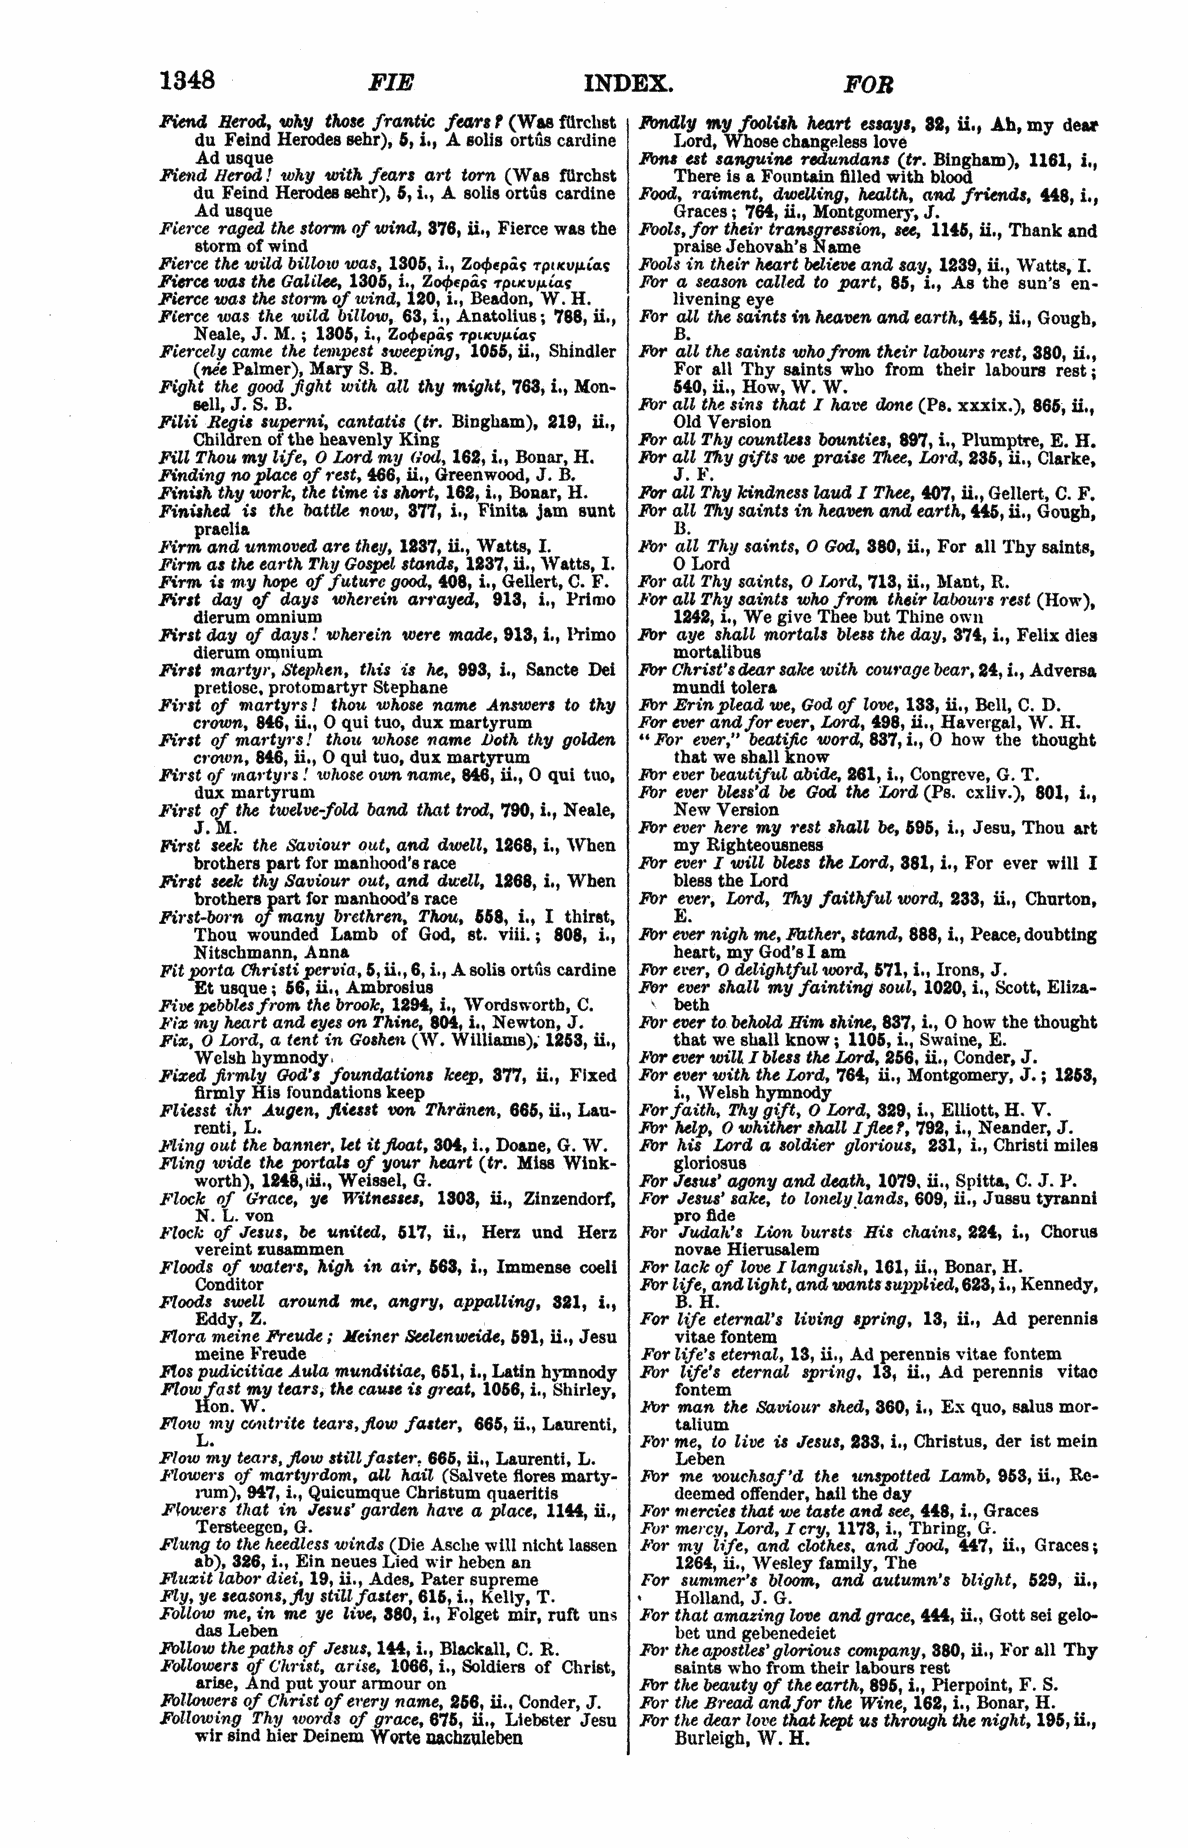 Image of page 1348